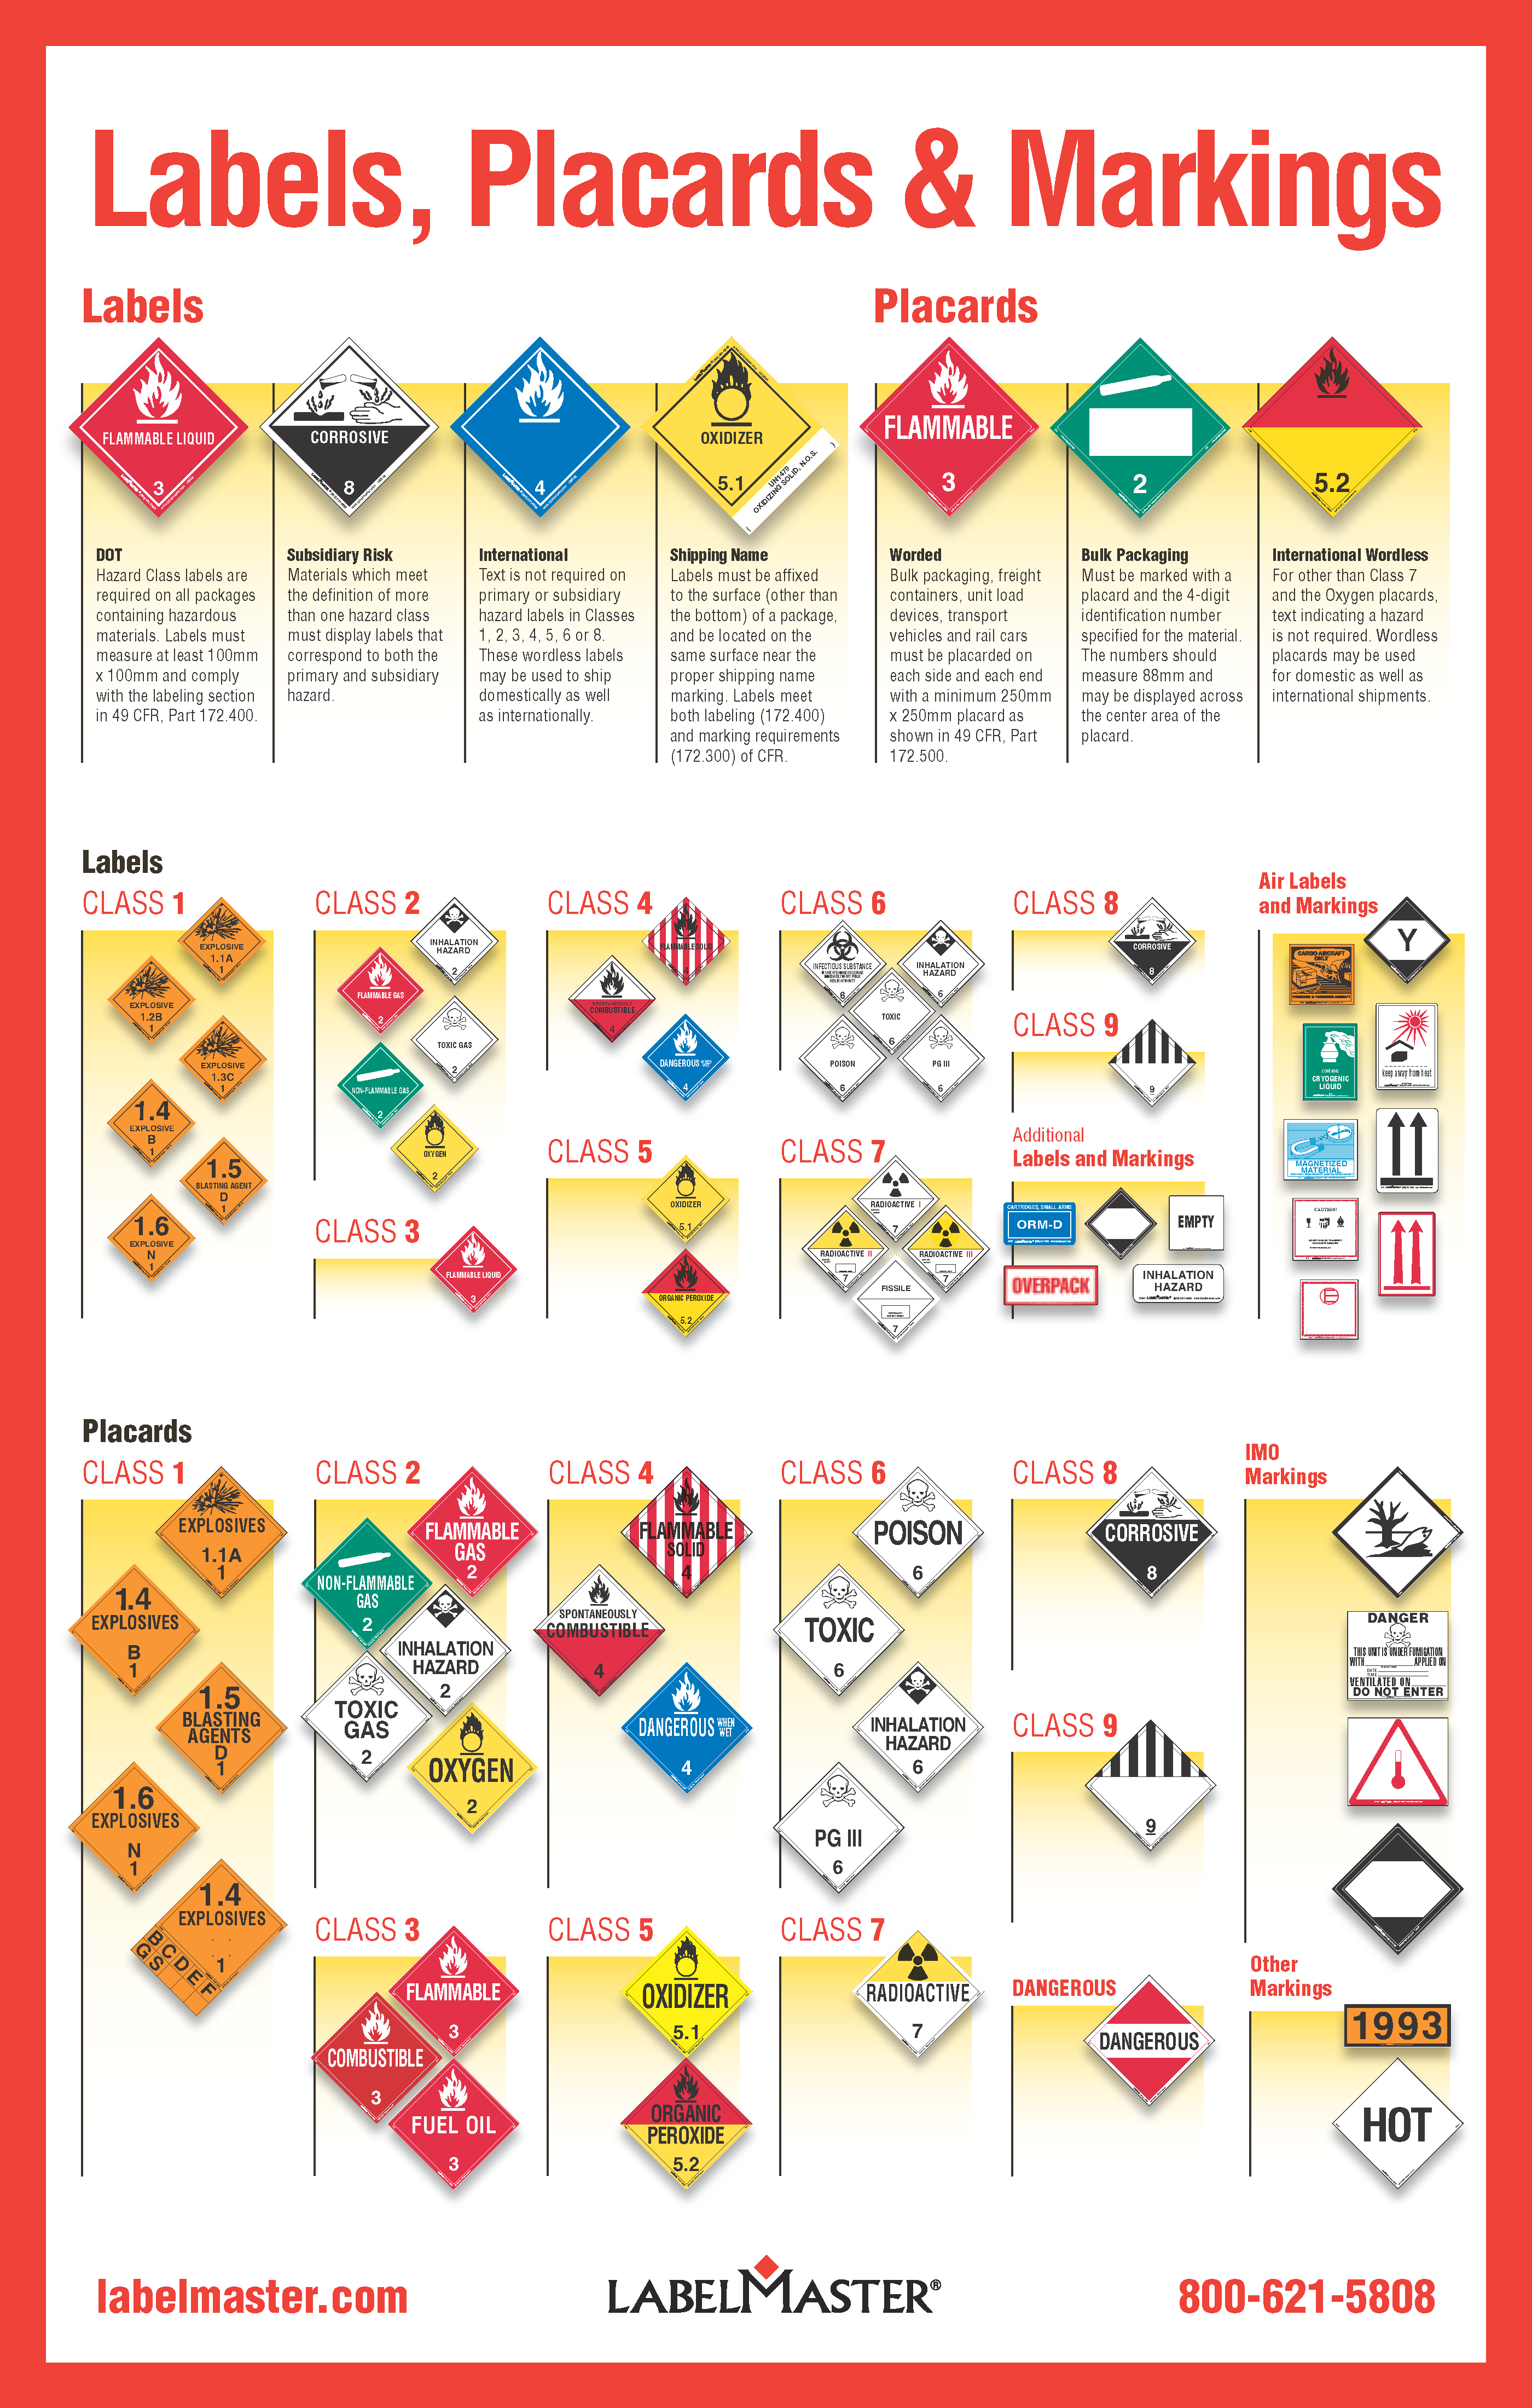 Shipping Dangerous Goods Ground Transport Guide Labelmaster from